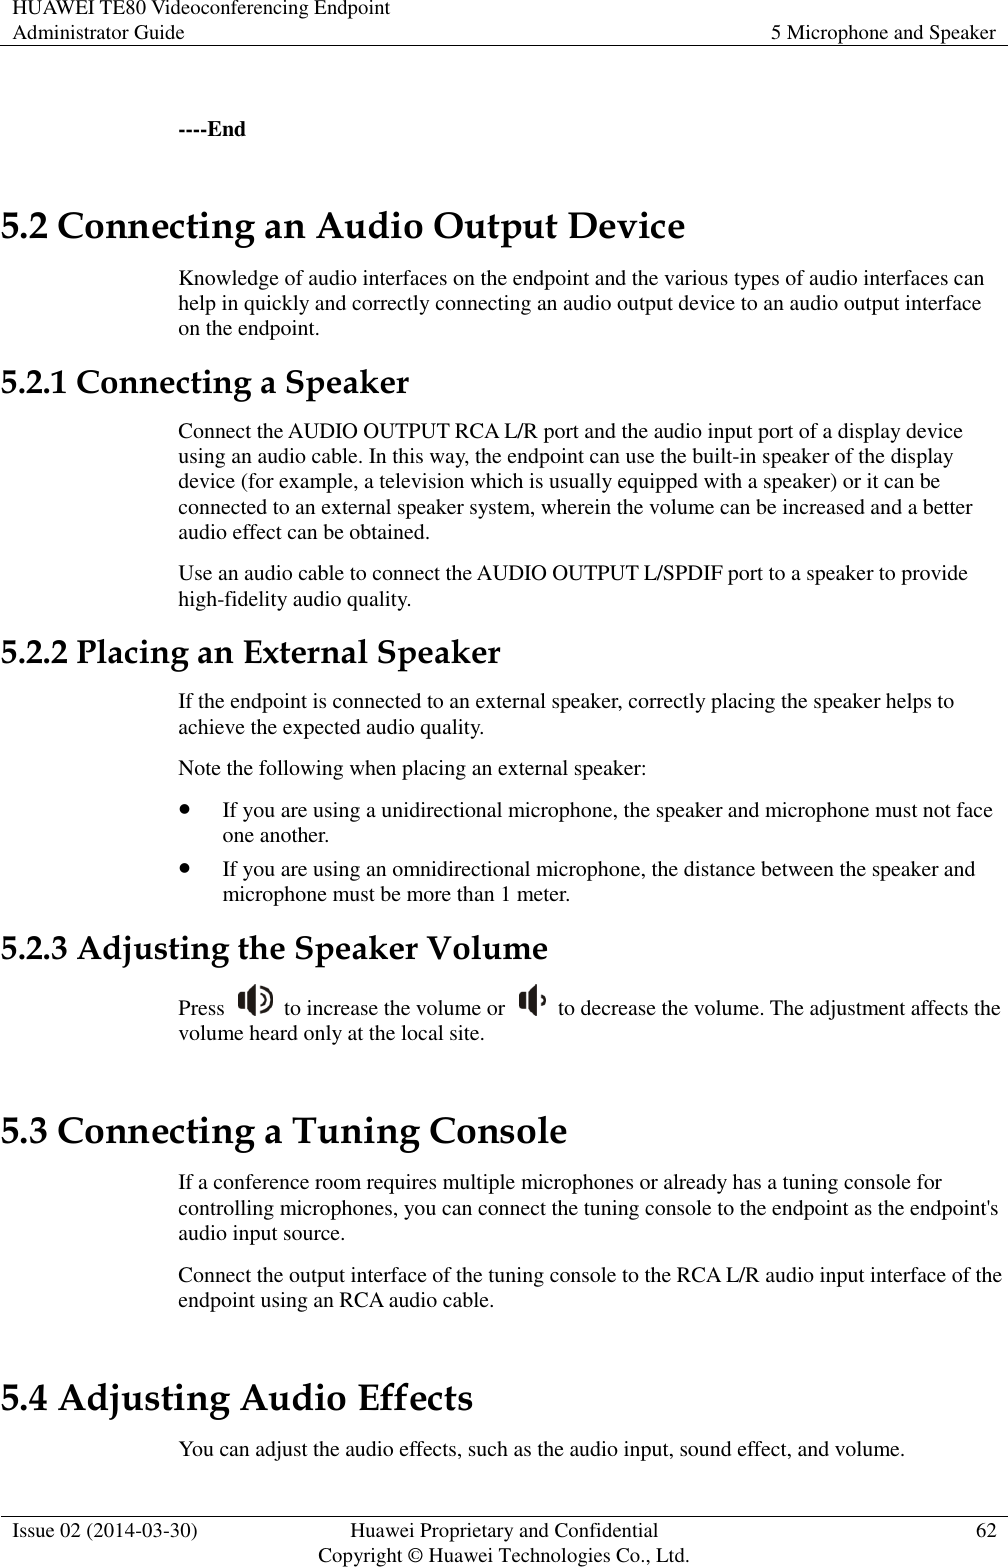 HUAWEI TE80 Videoconferencing Endpoint Administrator Guide 5 Microphone and Speaker  Issue 02 (2014-03-30) Huawei Proprietary and Confidential Copyright © Huawei Technologies Co., Ltd. 62   ----End 5.2 Connecting an Audio Output Device Knowledge of audio interfaces on the endpoint and the various types of audio interfaces can help in quickly and correctly connecting an audio output device to an audio output interface on the endpoint. 5.2.1 Connecting a Speaker Connect the AUDIO OUTPUT RCA L/R port and the audio input port of a display device using an audio cable. In this way, the endpoint can use the built-in speaker of the display device (for example, a television which is usually equipped with a speaker) or it can be connected to an external speaker system, wherein the volume can be increased and a better audio effect can be obtained. Use an audio cable to connect the AUDIO OUTPUT L/SPDIF port to a speaker to provide high-fidelity audio quality. 5.2.2 Placing an External Speaker If the endpoint is connected to an external speaker, correctly placing the speaker helps to achieve the expected audio quality. Note the following when placing an external speaker:  If you are using a unidirectional microphone, the speaker and microphone must not face one another.  If you are using an omnidirectional microphone, the distance between the speaker and microphone must be more than 1 meter. 5.2.3 Adjusting the Speaker Volume Press    to increase the volume or    to decrease the volume. The adjustment affects the volume heard only at the local site. 5.3 Connecting a Tuning Console If a conference room requires multiple microphones or already has a tuning console for controlling microphones, you can connect the tuning console to the endpoint as the endpoint&apos;s audio input source. Connect the output interface of the tuning console to the RCA L/R audio input interface of the endpoint using an RCA audio cable. 5.4 Adjusting Audio Effects You can adjust the audio effects, such as the audio input, sound effect, and volume. 